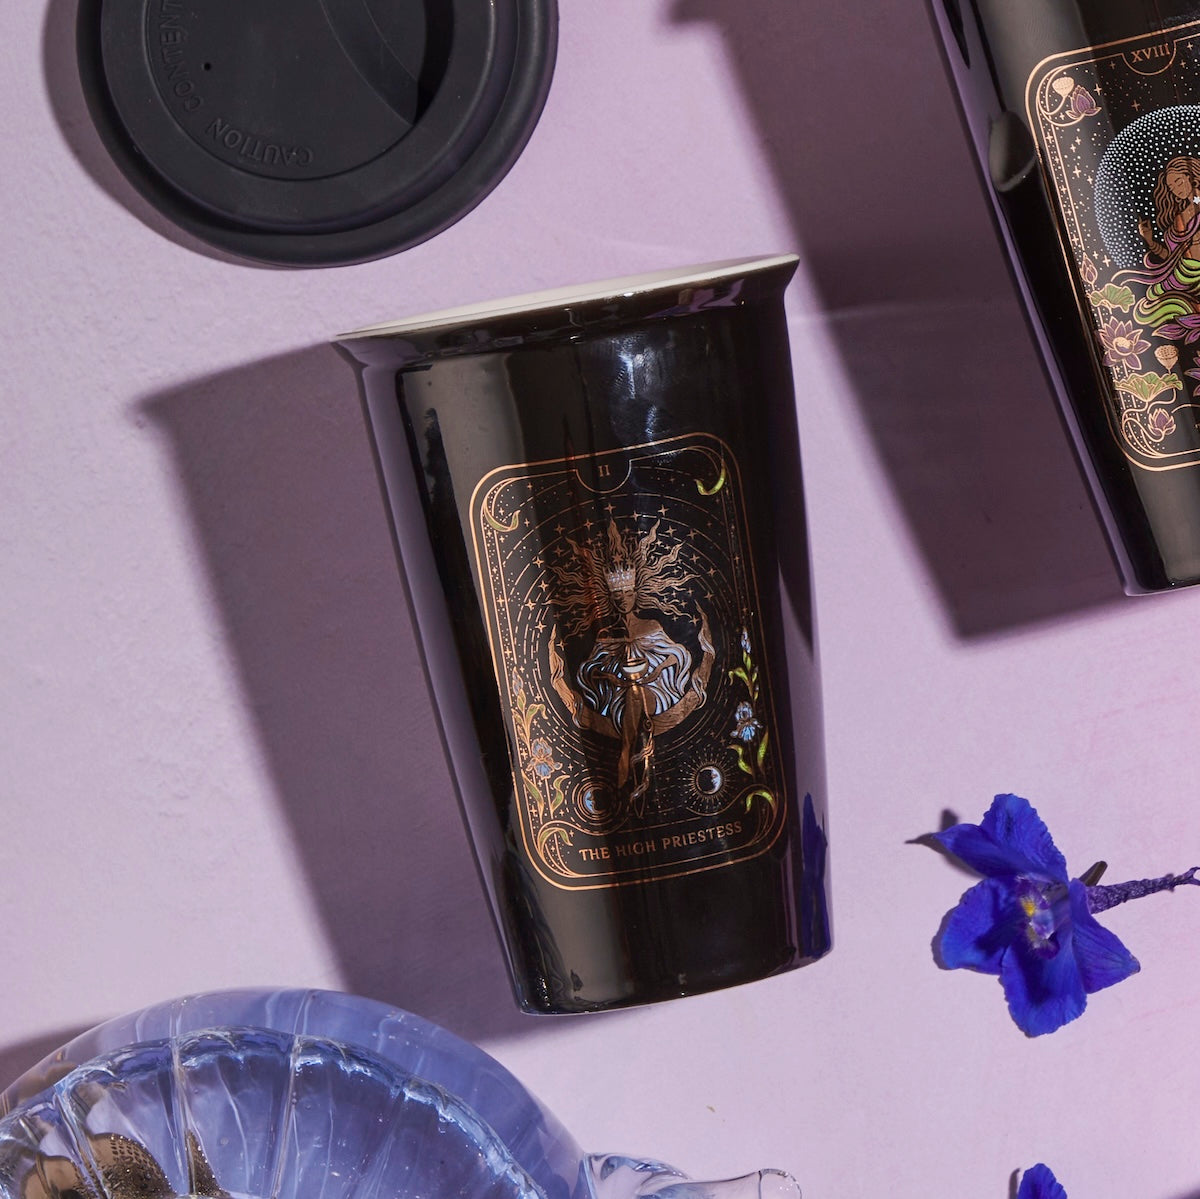 A black reusable cup with an artistic design labeled &quot;The Queen of Cups - Tarot To Go!,&quot; featuring intricate, mystical imagery, perfect for savoring your favorite organic tea. The cup sits on a pink surface, accompanied by a matching lid, a blue flower, and part of a clear glass dish.